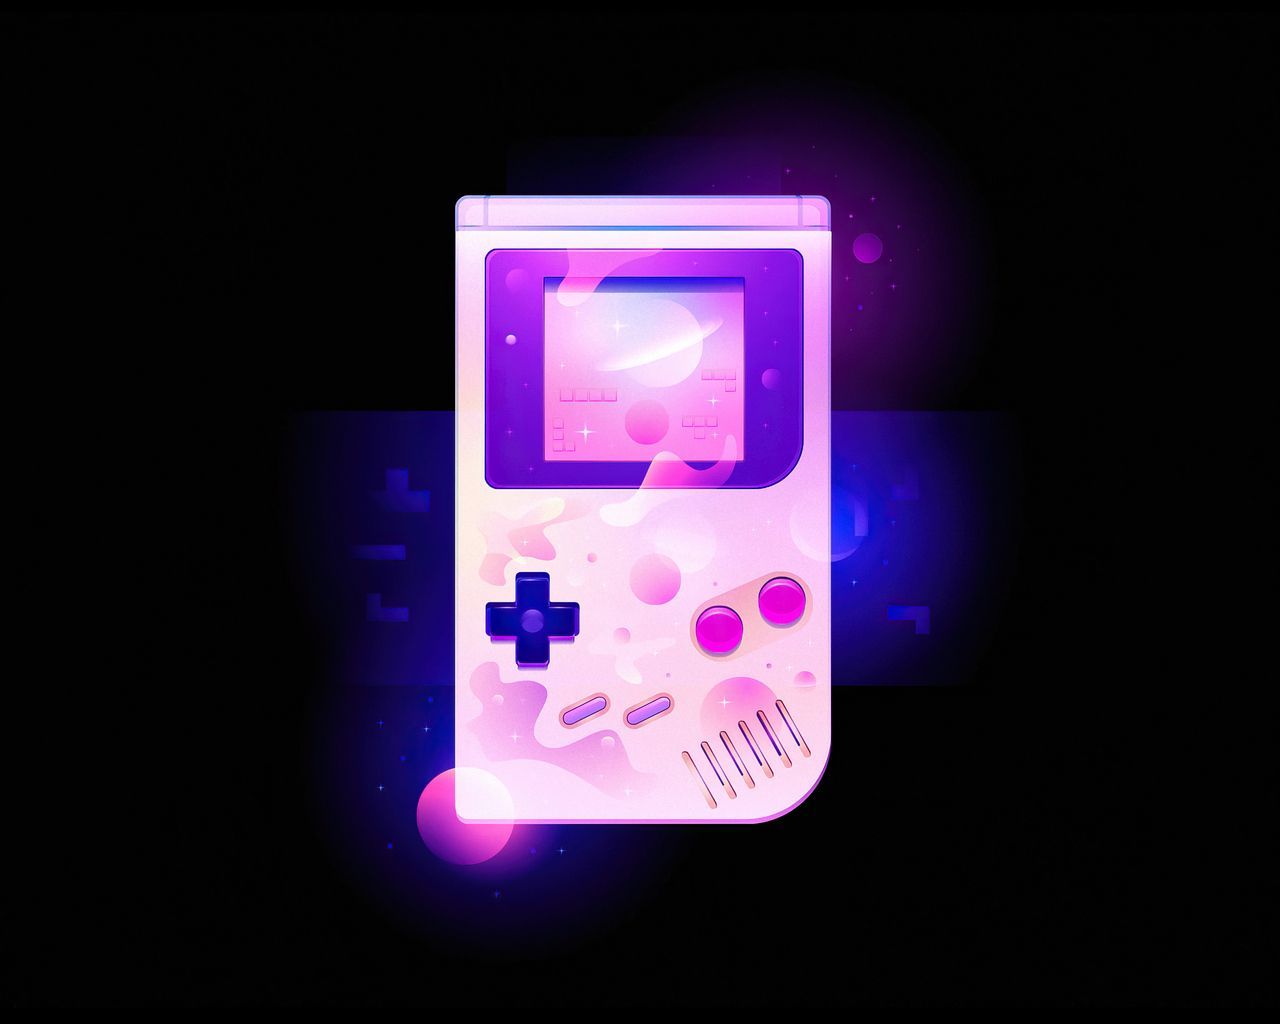 A pink and purple Gameboy with a black background - Arcade